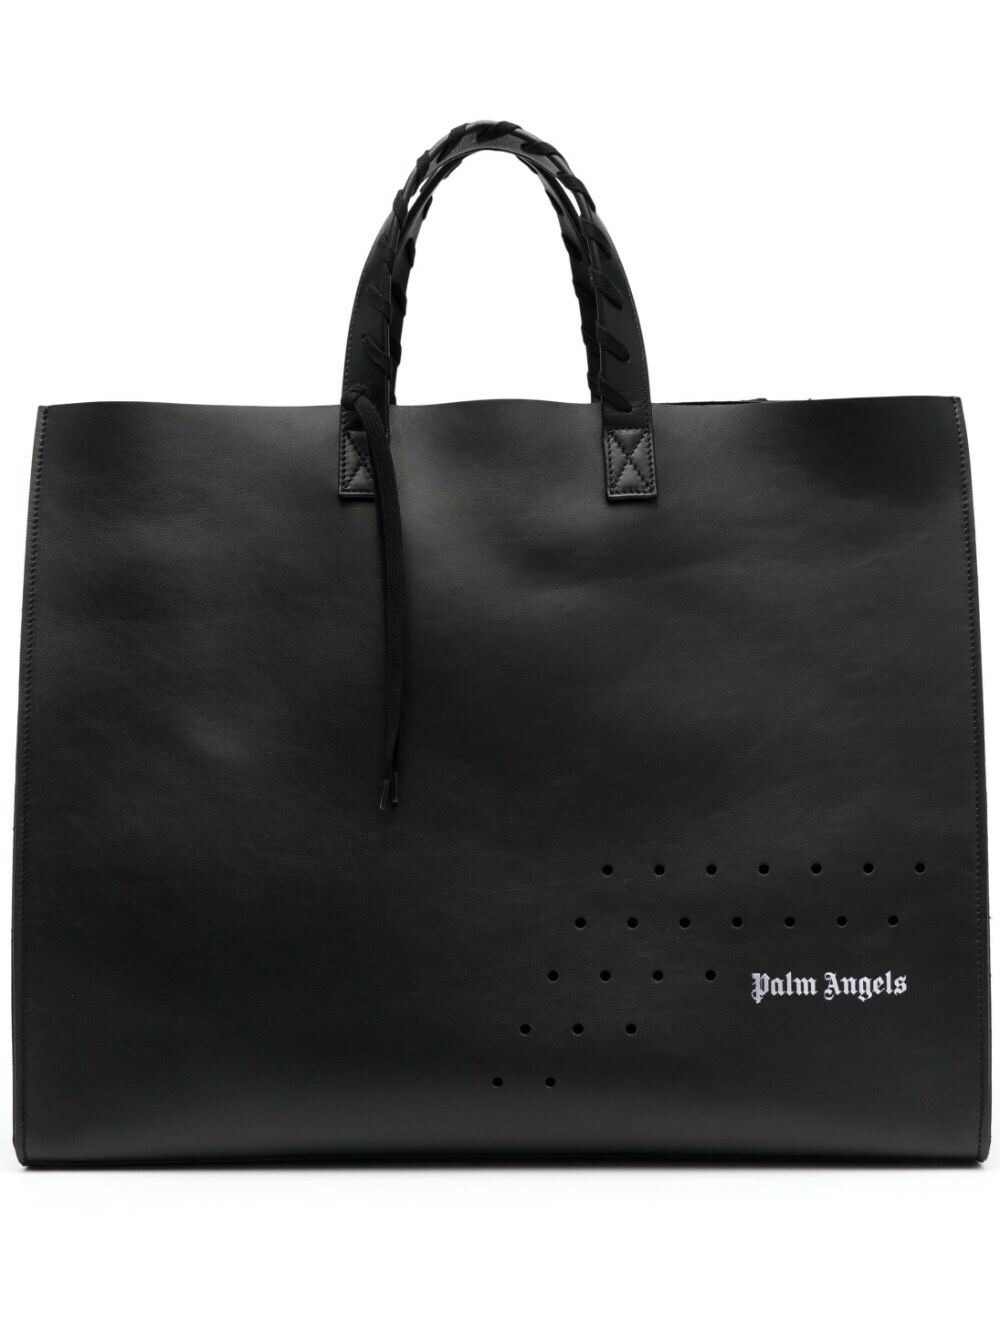 PALM ANGELS - Palm One Leather Tote Bag Palm Angels